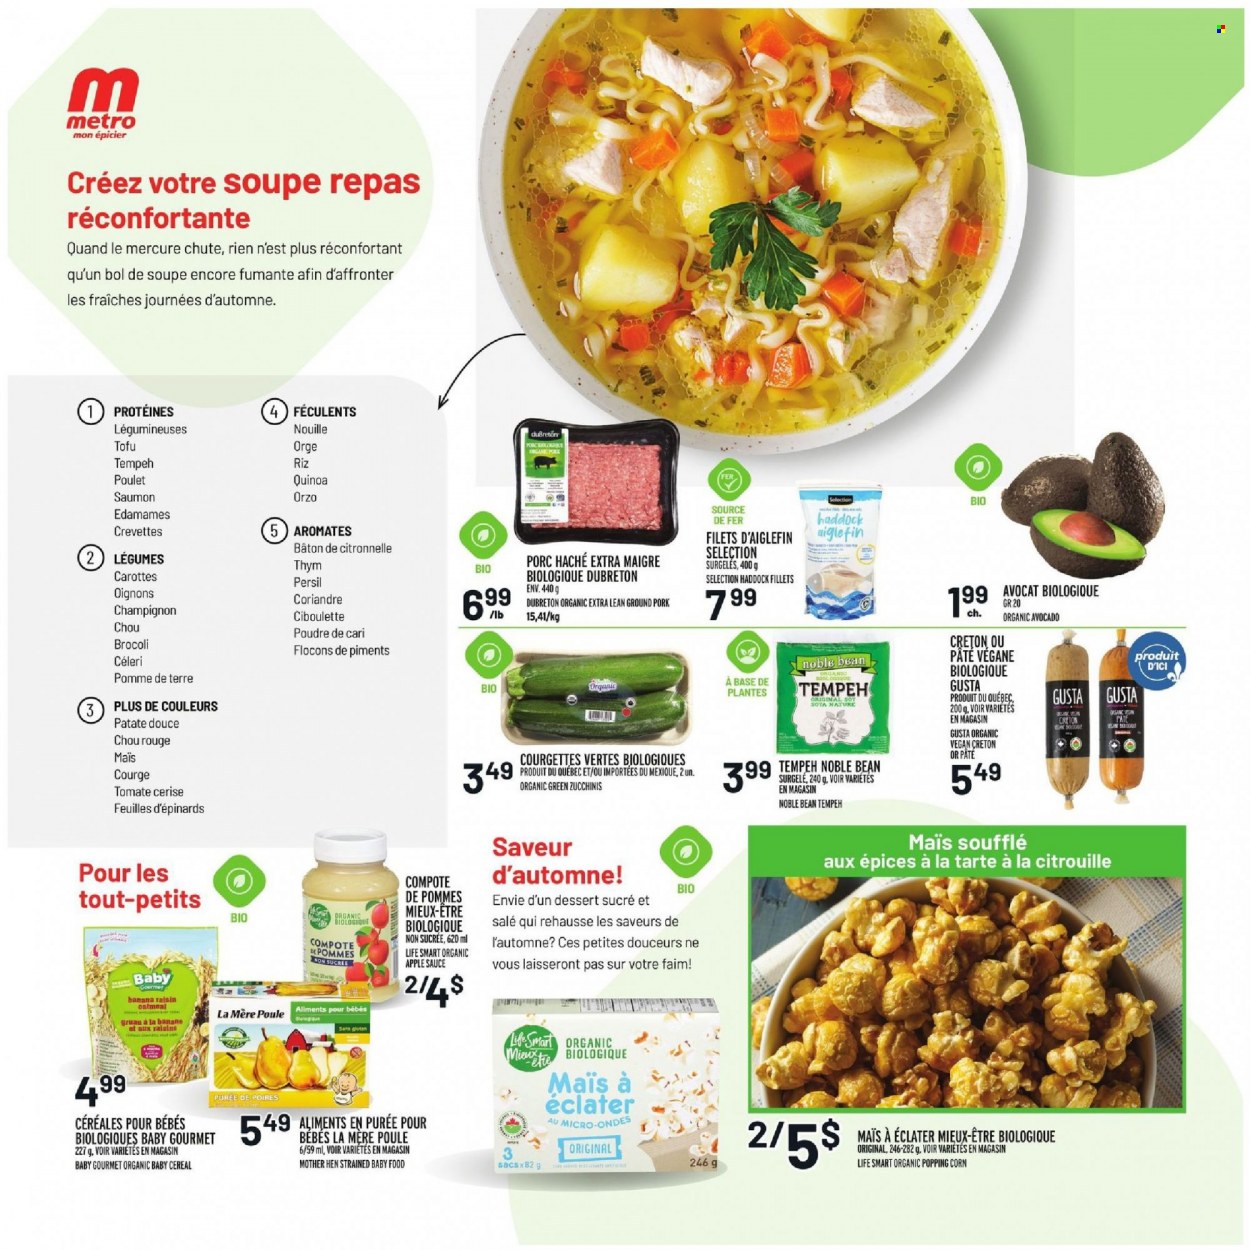 thumbnail - Metro Flyer - October 14, 2021 - October 20, 2021 - Sales products - corn, avocado, haddock, sauce, tofu, compote, cereals, apple sauce, dried fruit, ground pork, Persil, quinoa, raisins. Page 2.